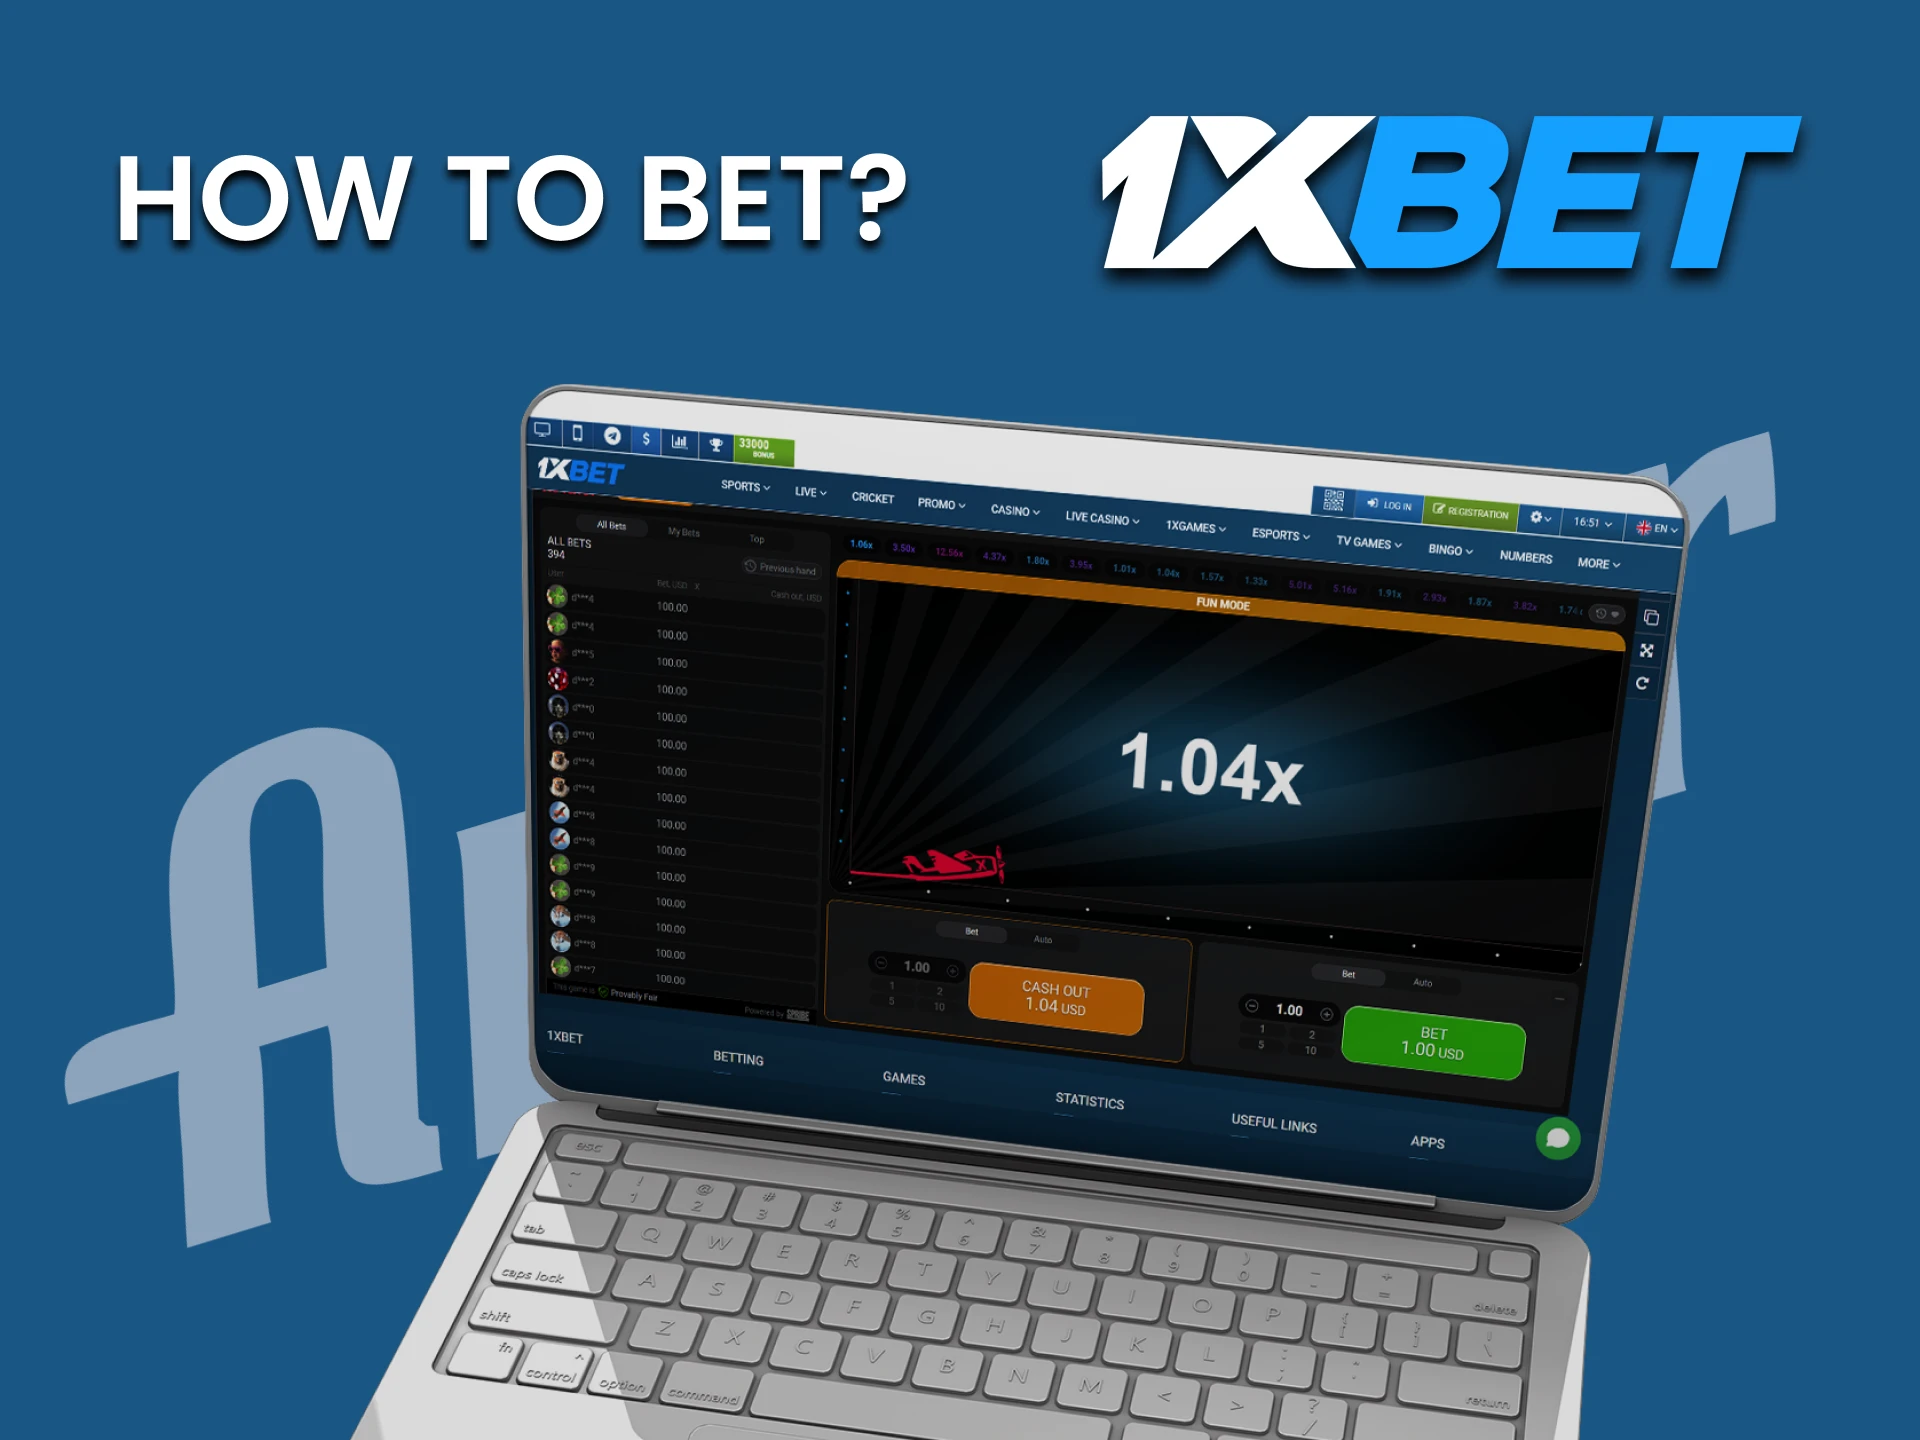 We will show you how to place bets in the Aviator game on 1xbet.